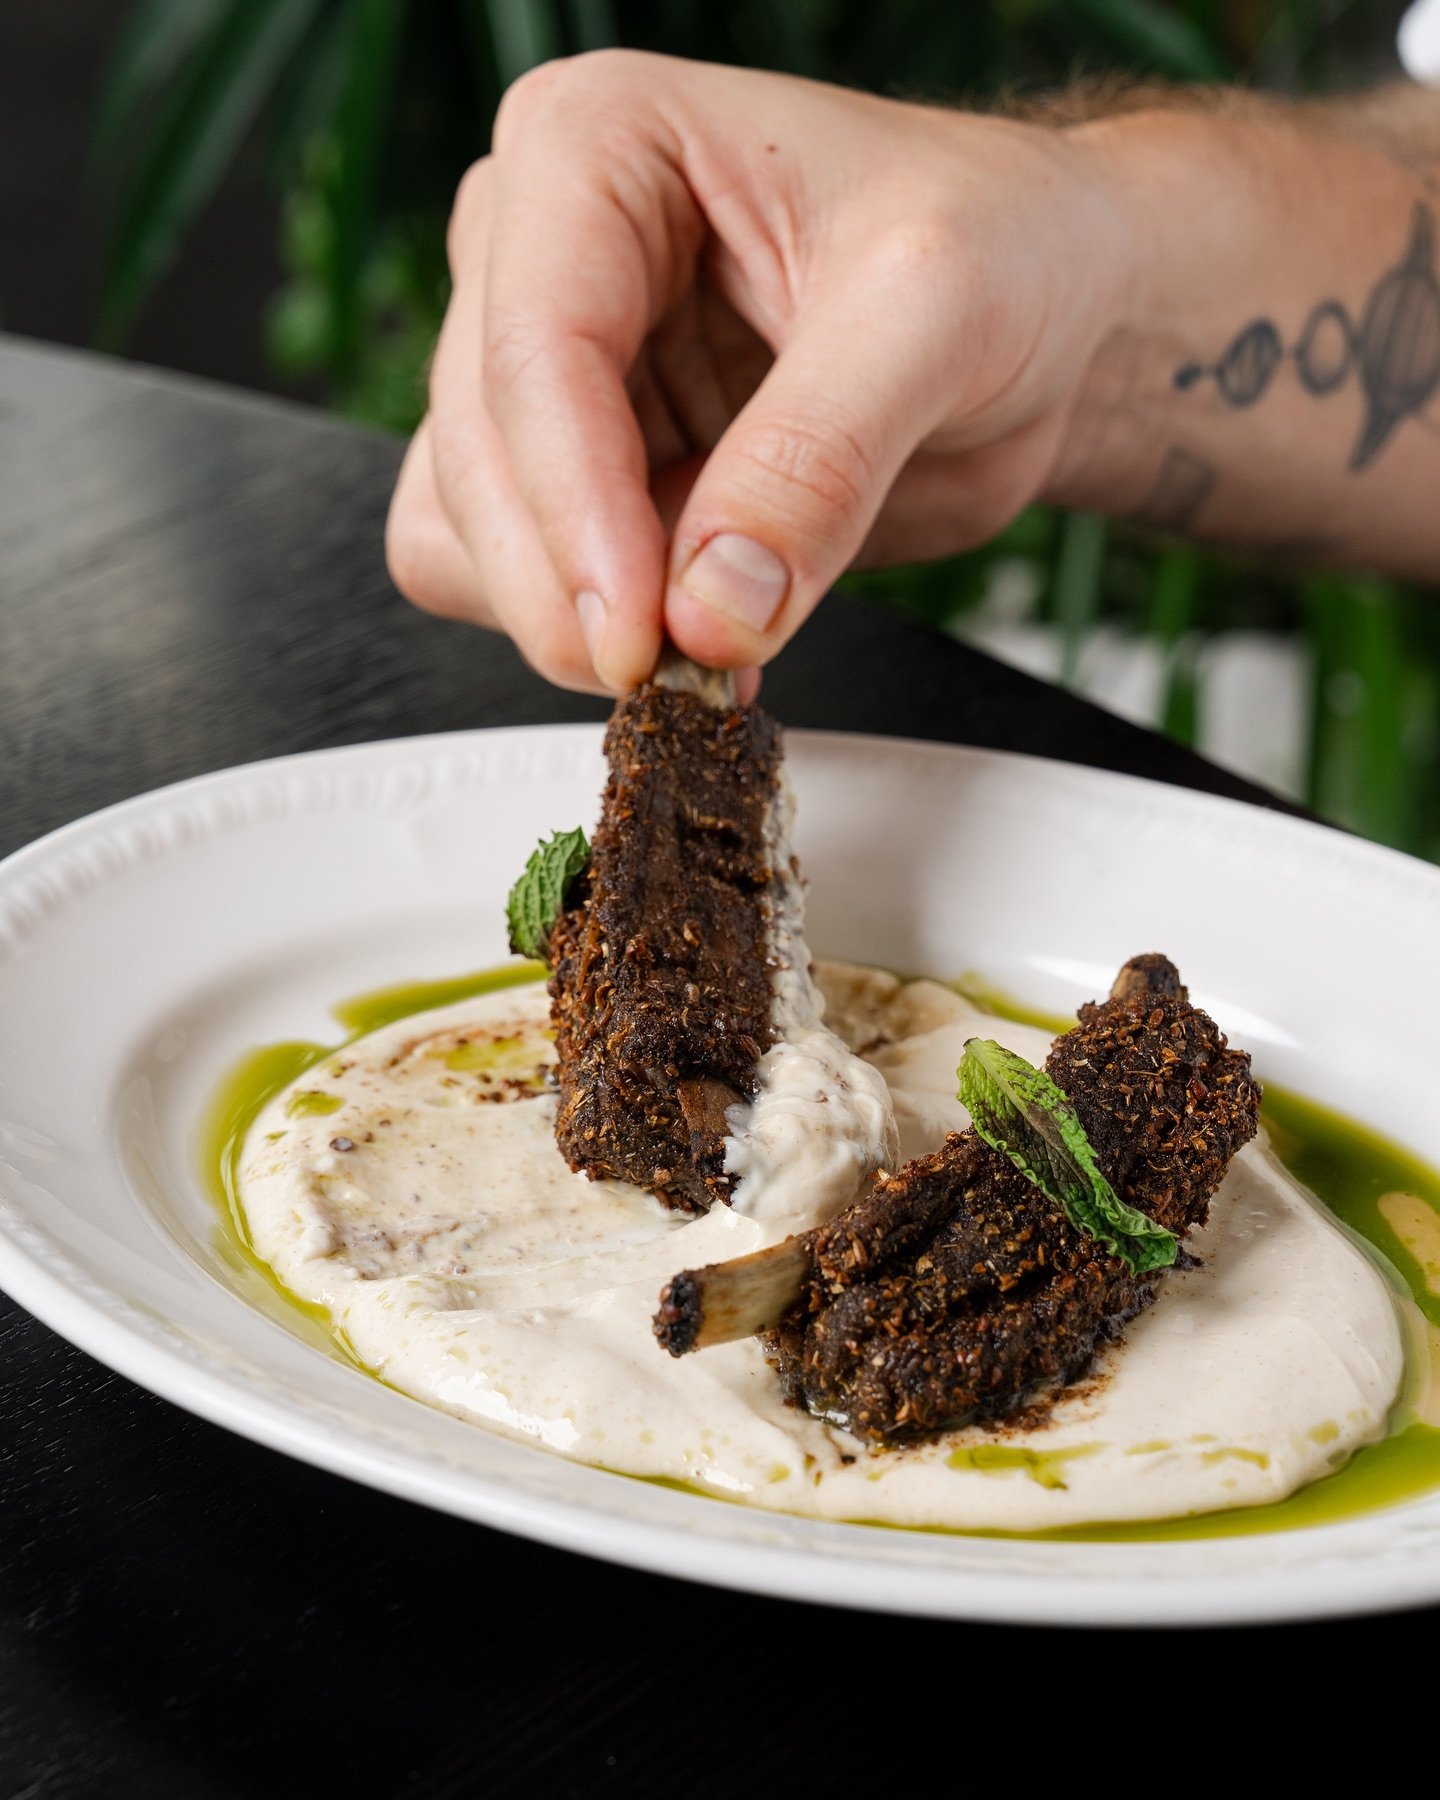 You&rsquo;ll be licking your fingers after trying our spiced lamb ribs! 
Perfectly seasoned and on a bed of tahini yogurt topped with mint.

www.foshportside.com.au/bookings for reservations or call us on (07) 3211 8111
Portside Wharf 3.01/39 Hercule